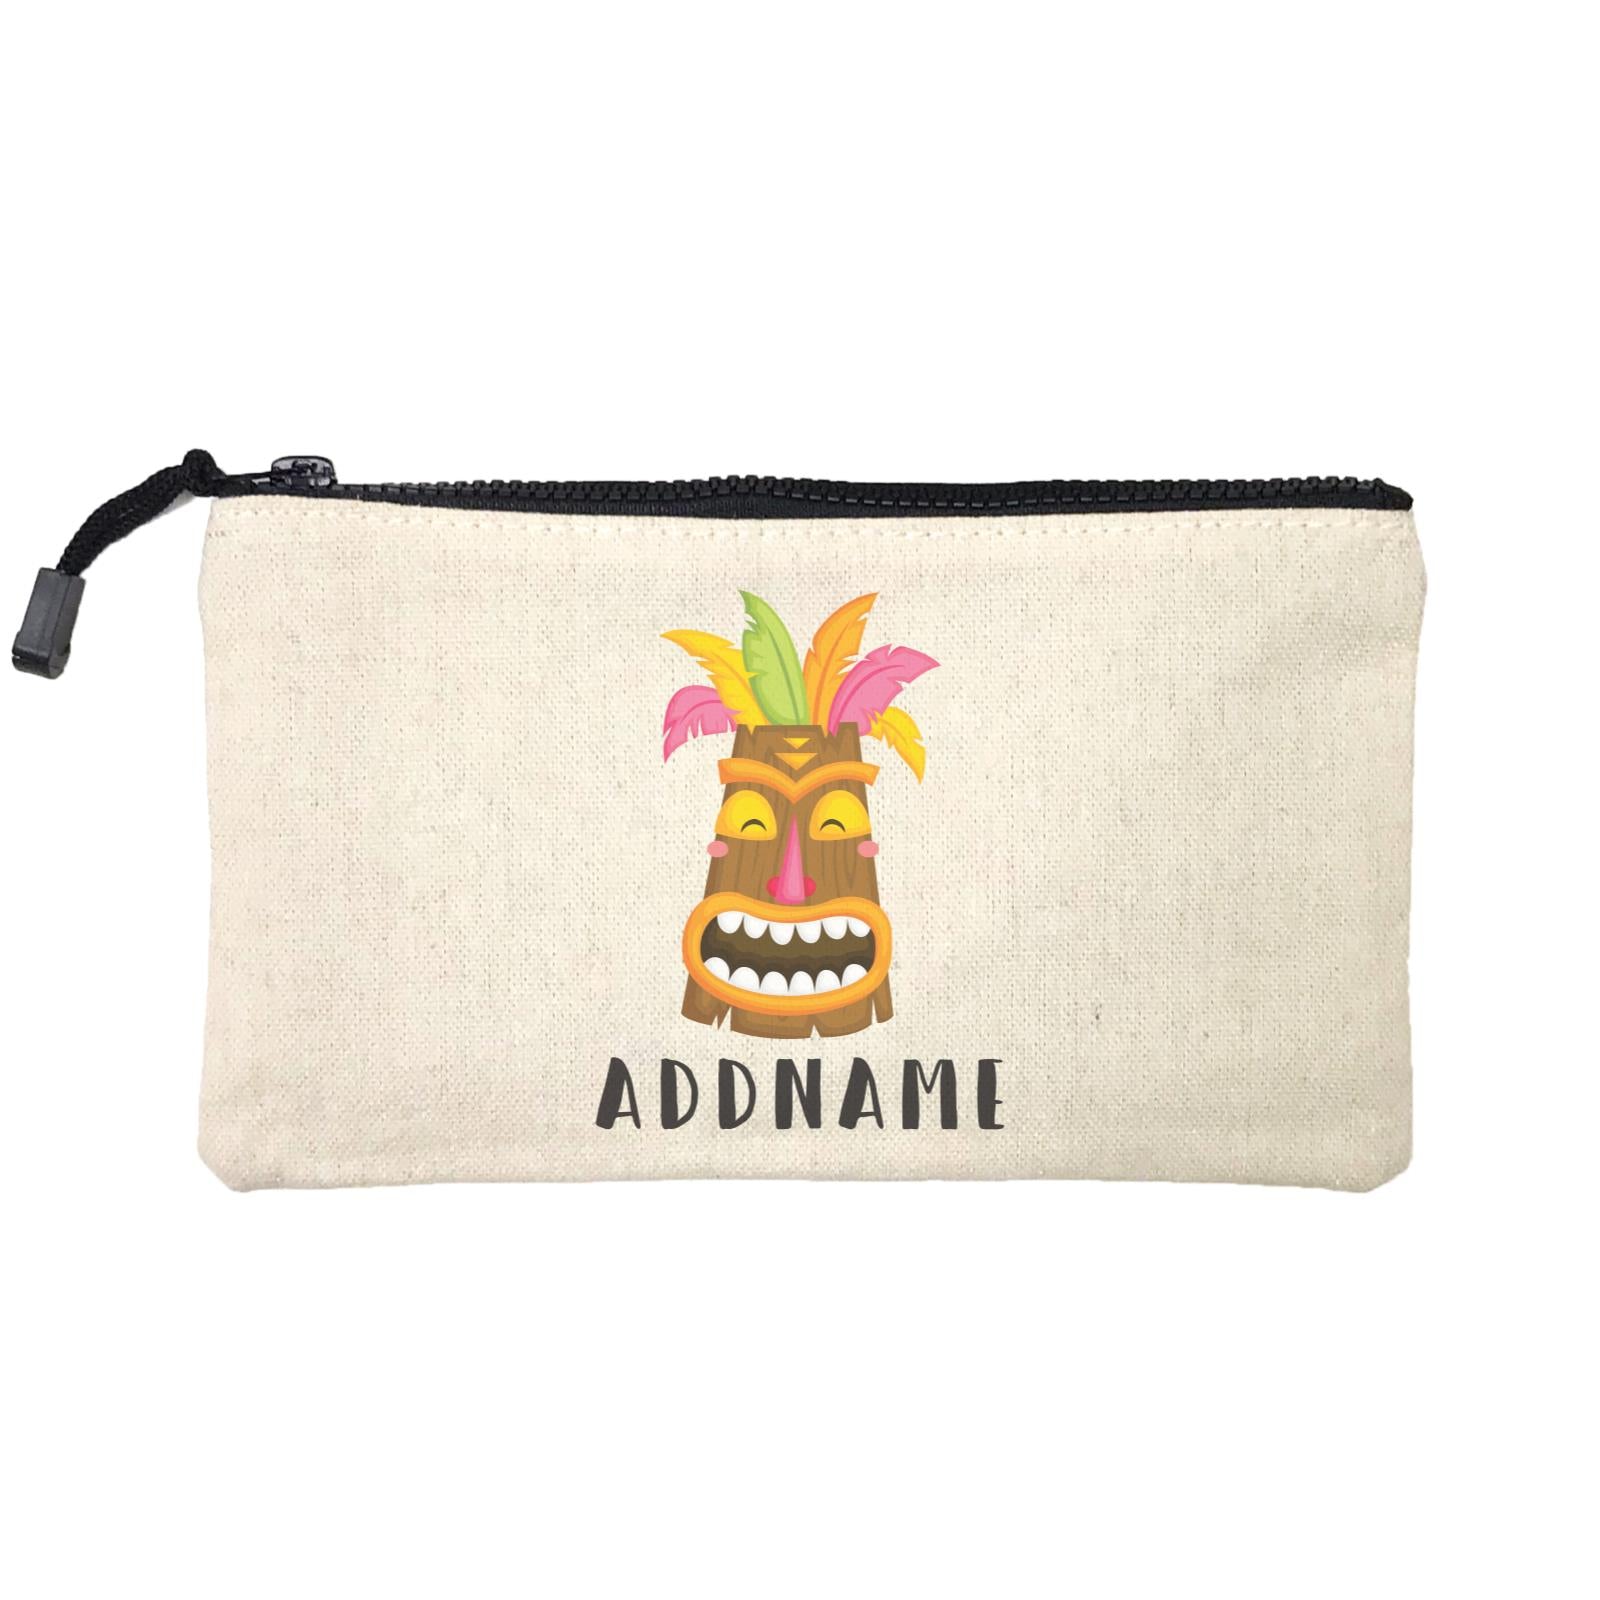 Birthday Hawaii Happy Laugh Tribal Mask Addname Mini Accessories Stationery Pouch